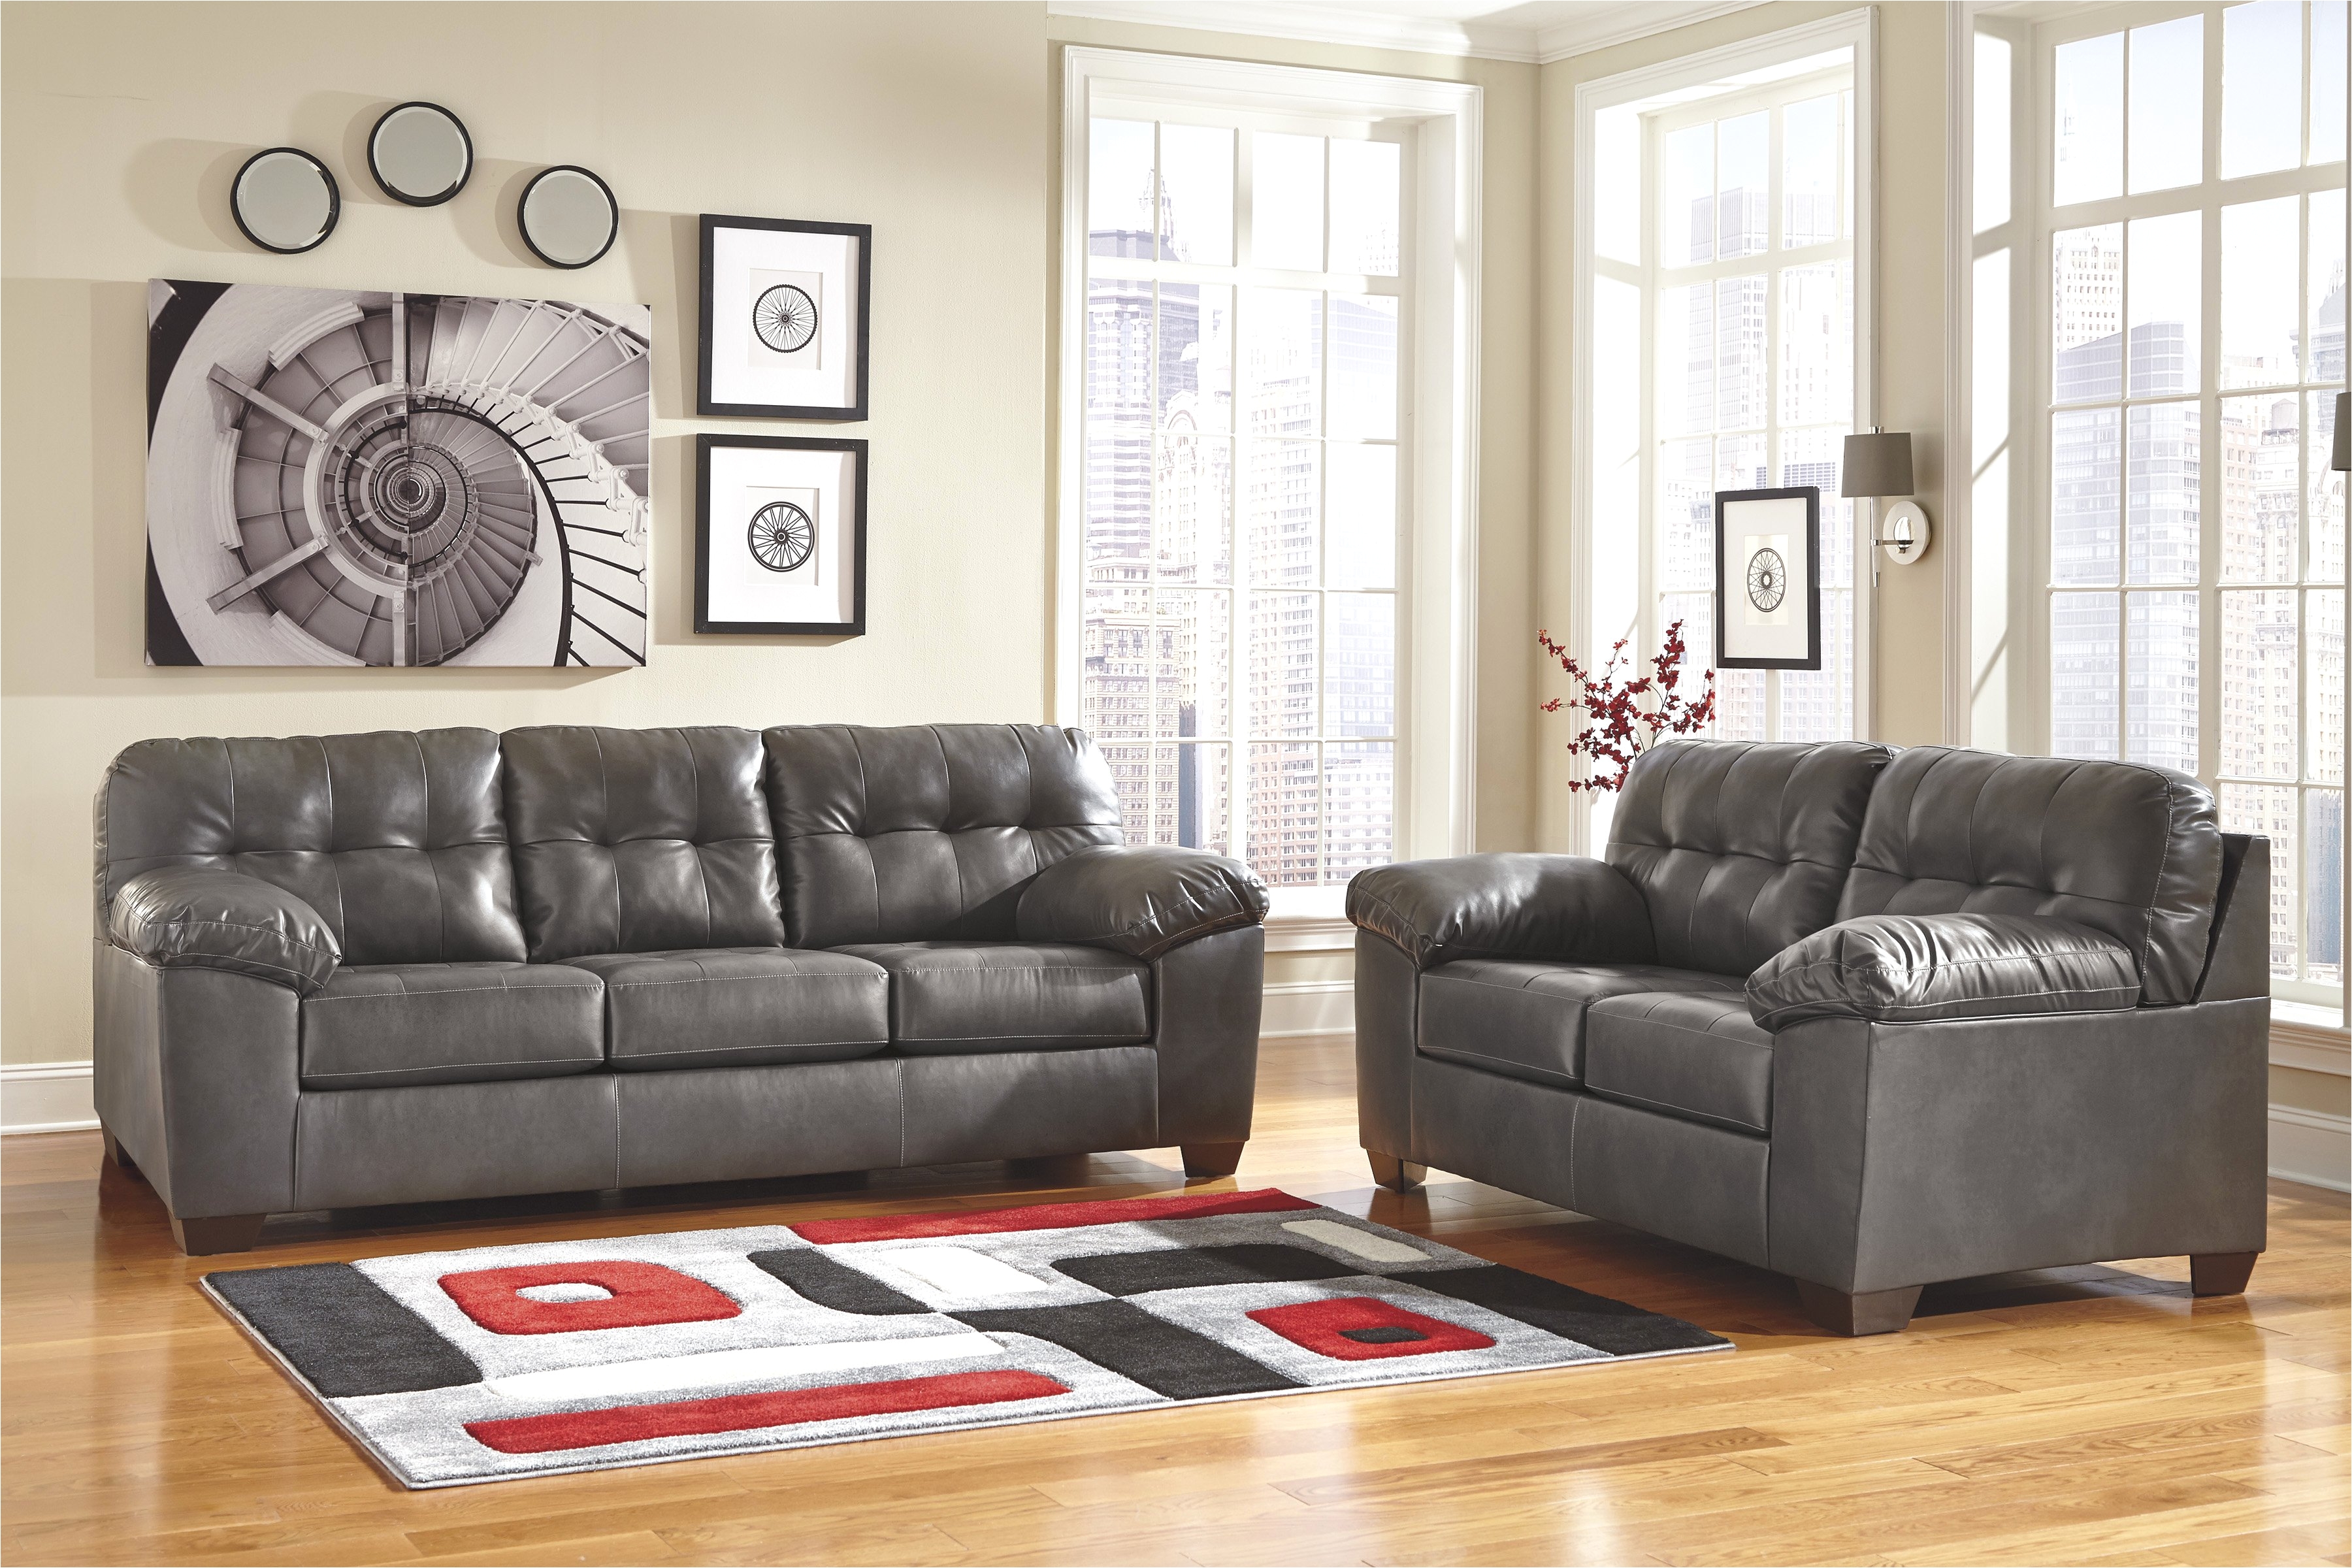 Couches at ashley Furniture Leather Sectional sofa with Chaise New Fantastic Sectional sofas